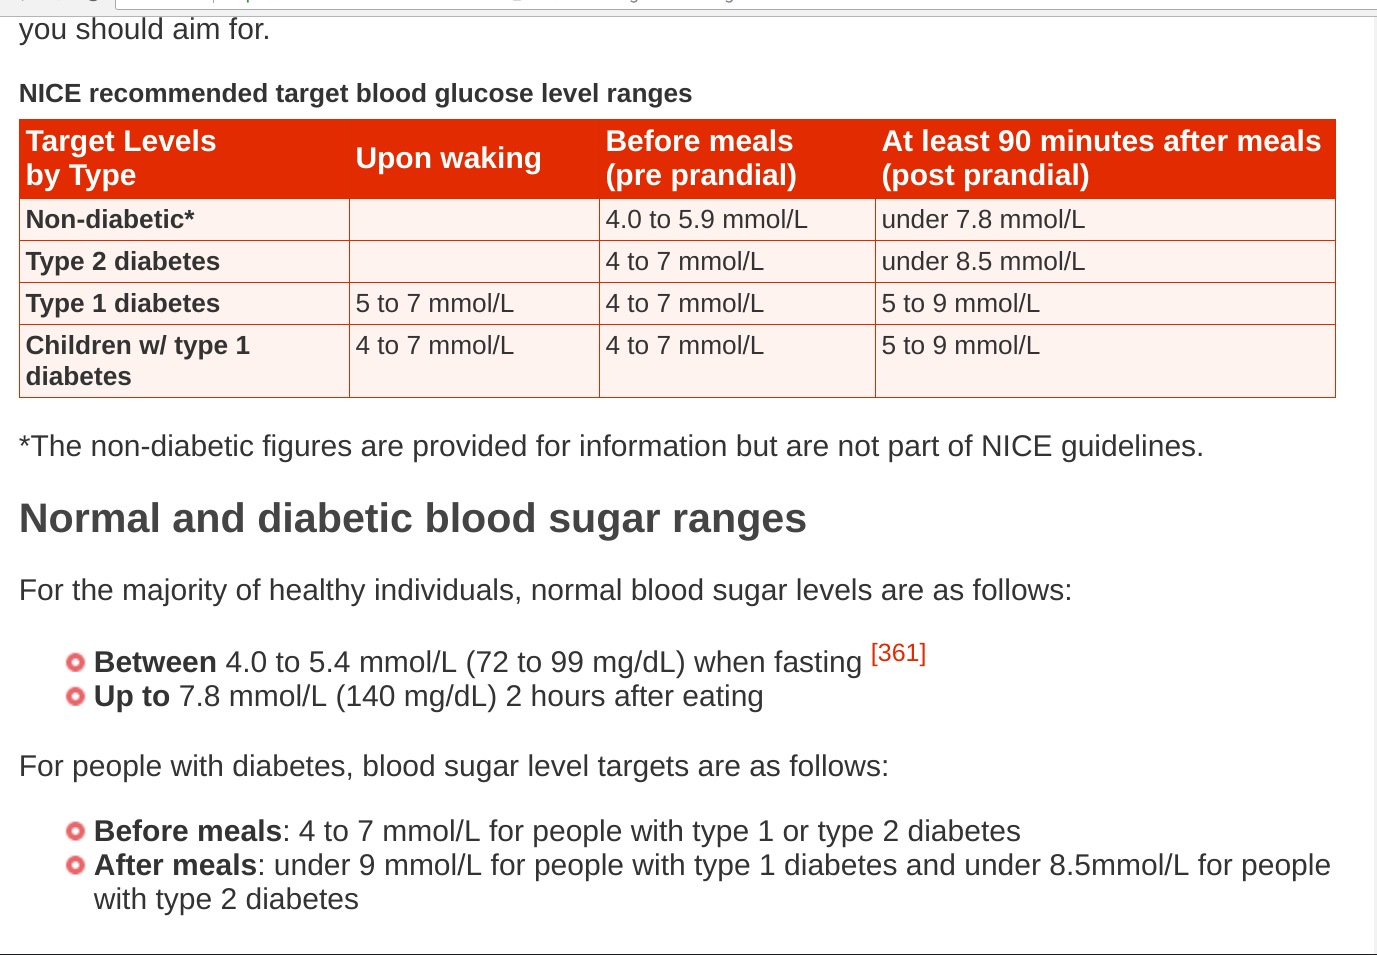 nice guidelines diabetes (type 1 children) international journal of diabetes and endocrinology